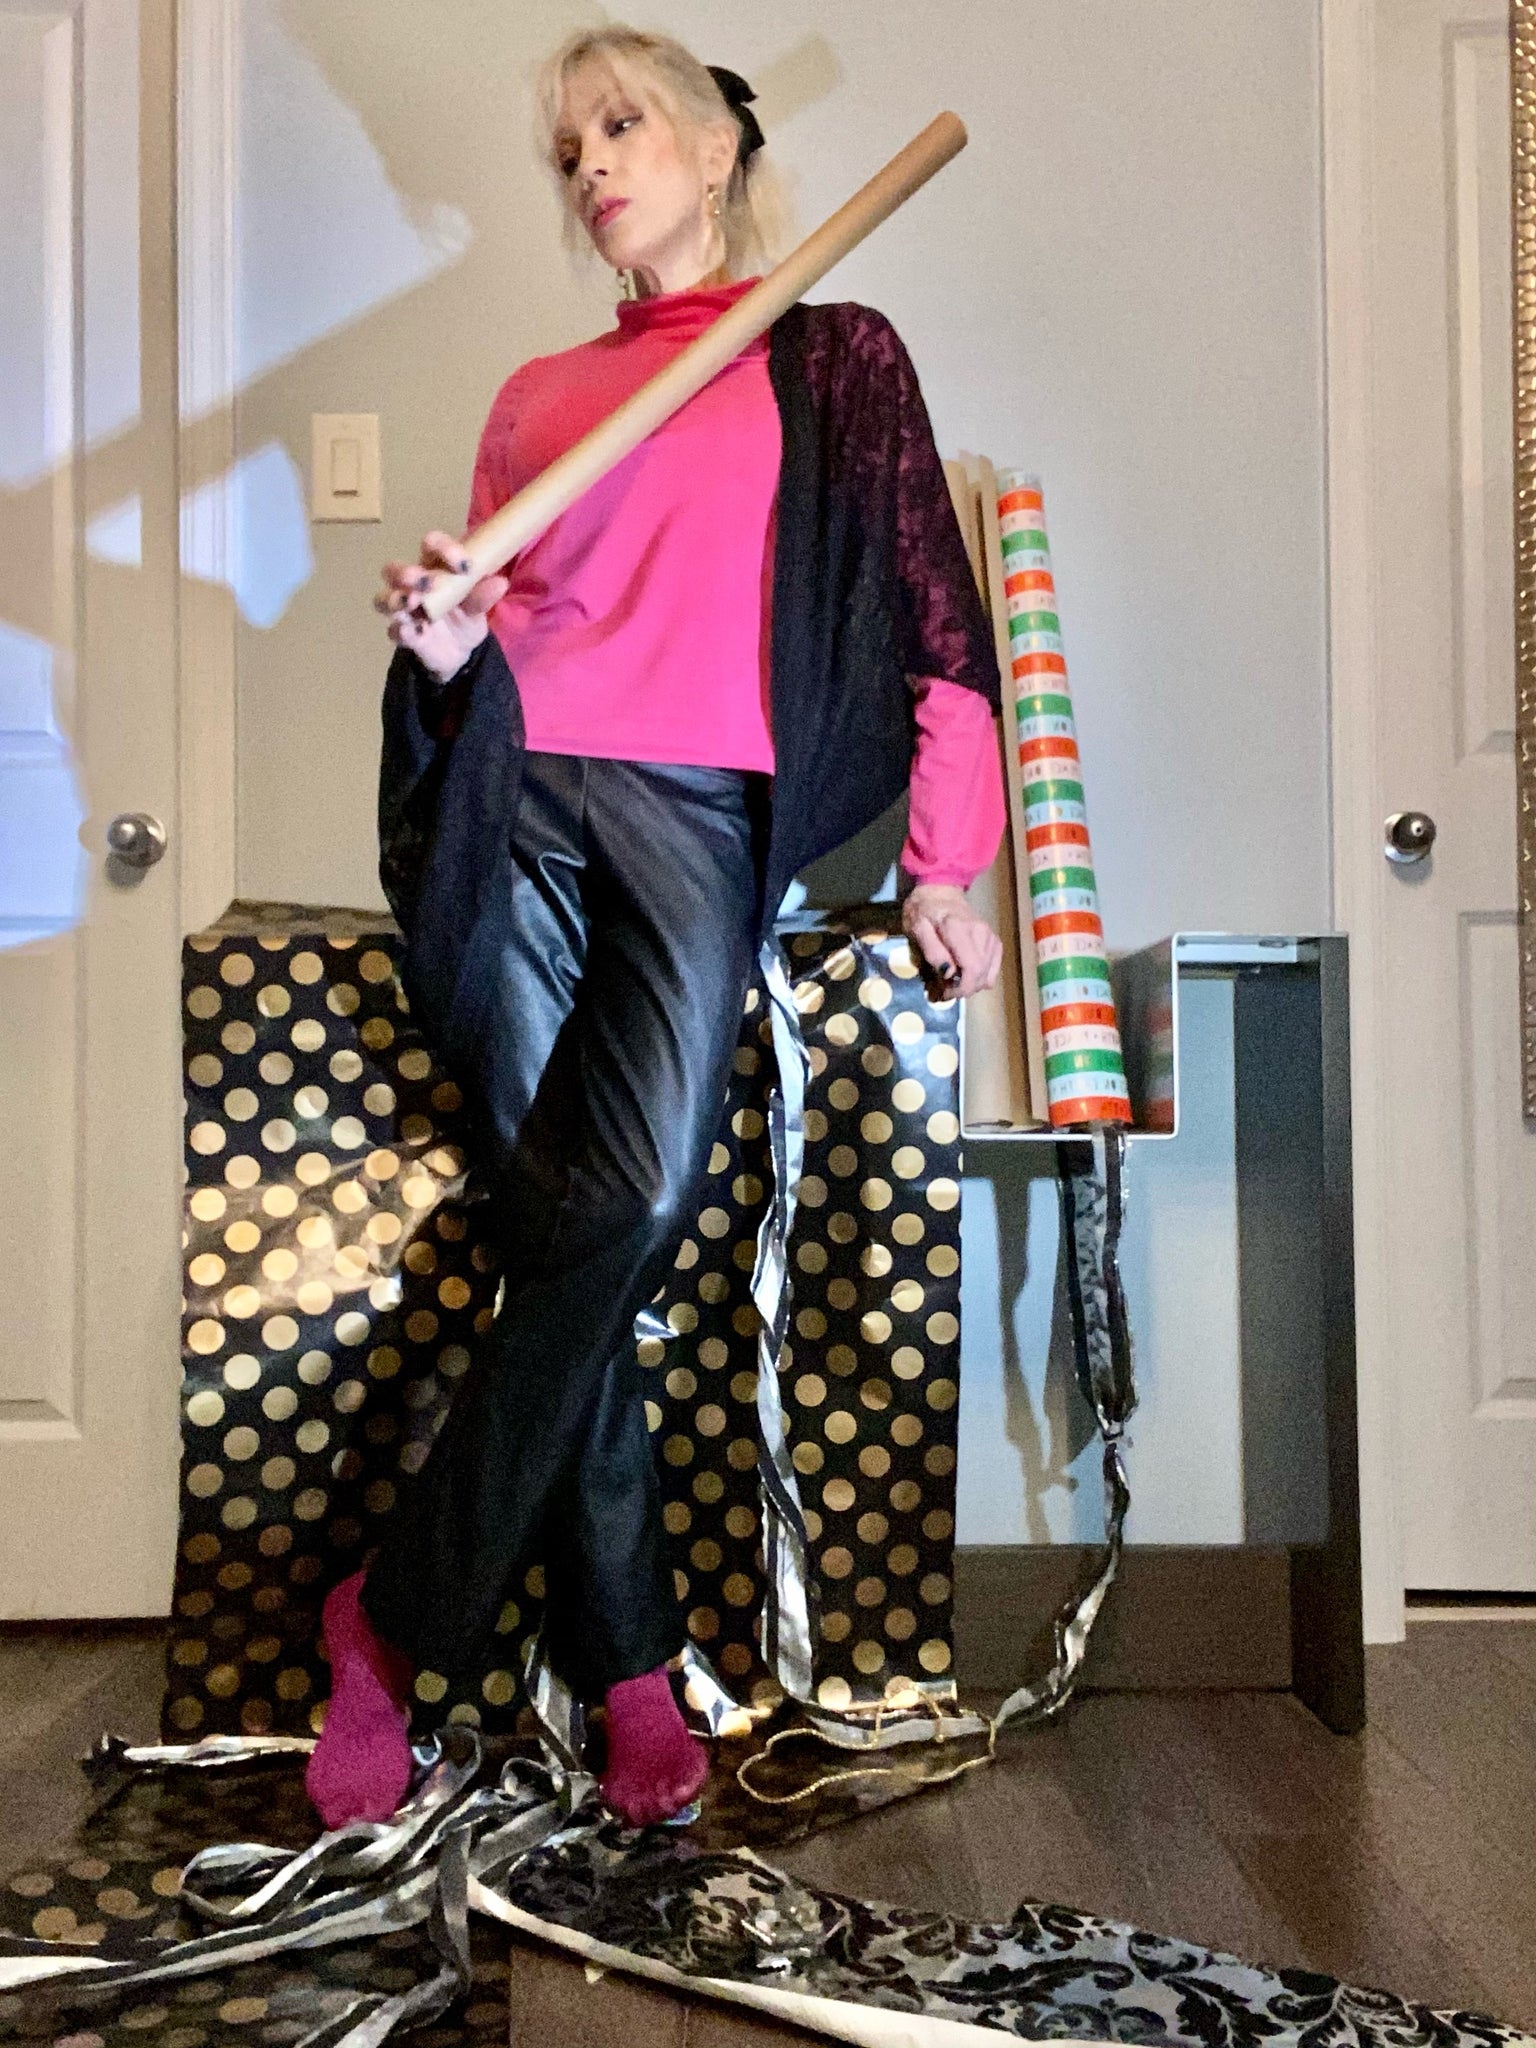 Judy wears a pink turtleneck with short 60s-inspired collar and gathered modified bishop sleeves. She paired it with black leatherette Kissin' pants and a black lace Pippa shrug. She stands in a mess of wrapping paper and holds an empty wrapping paper roll